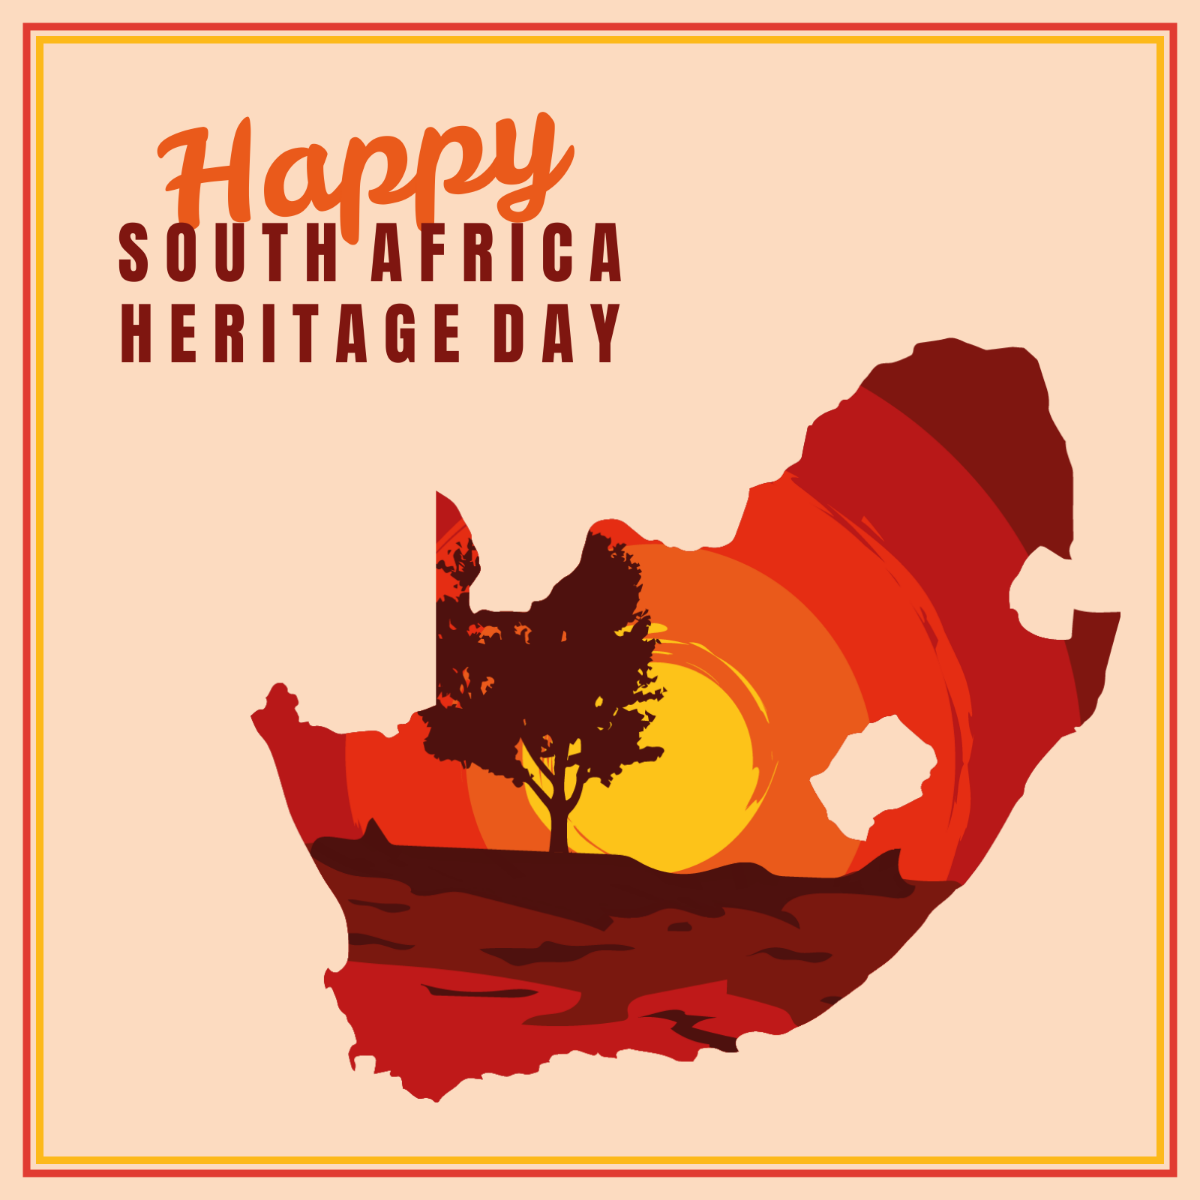 South Africa Heritage Day WhatsApp Post